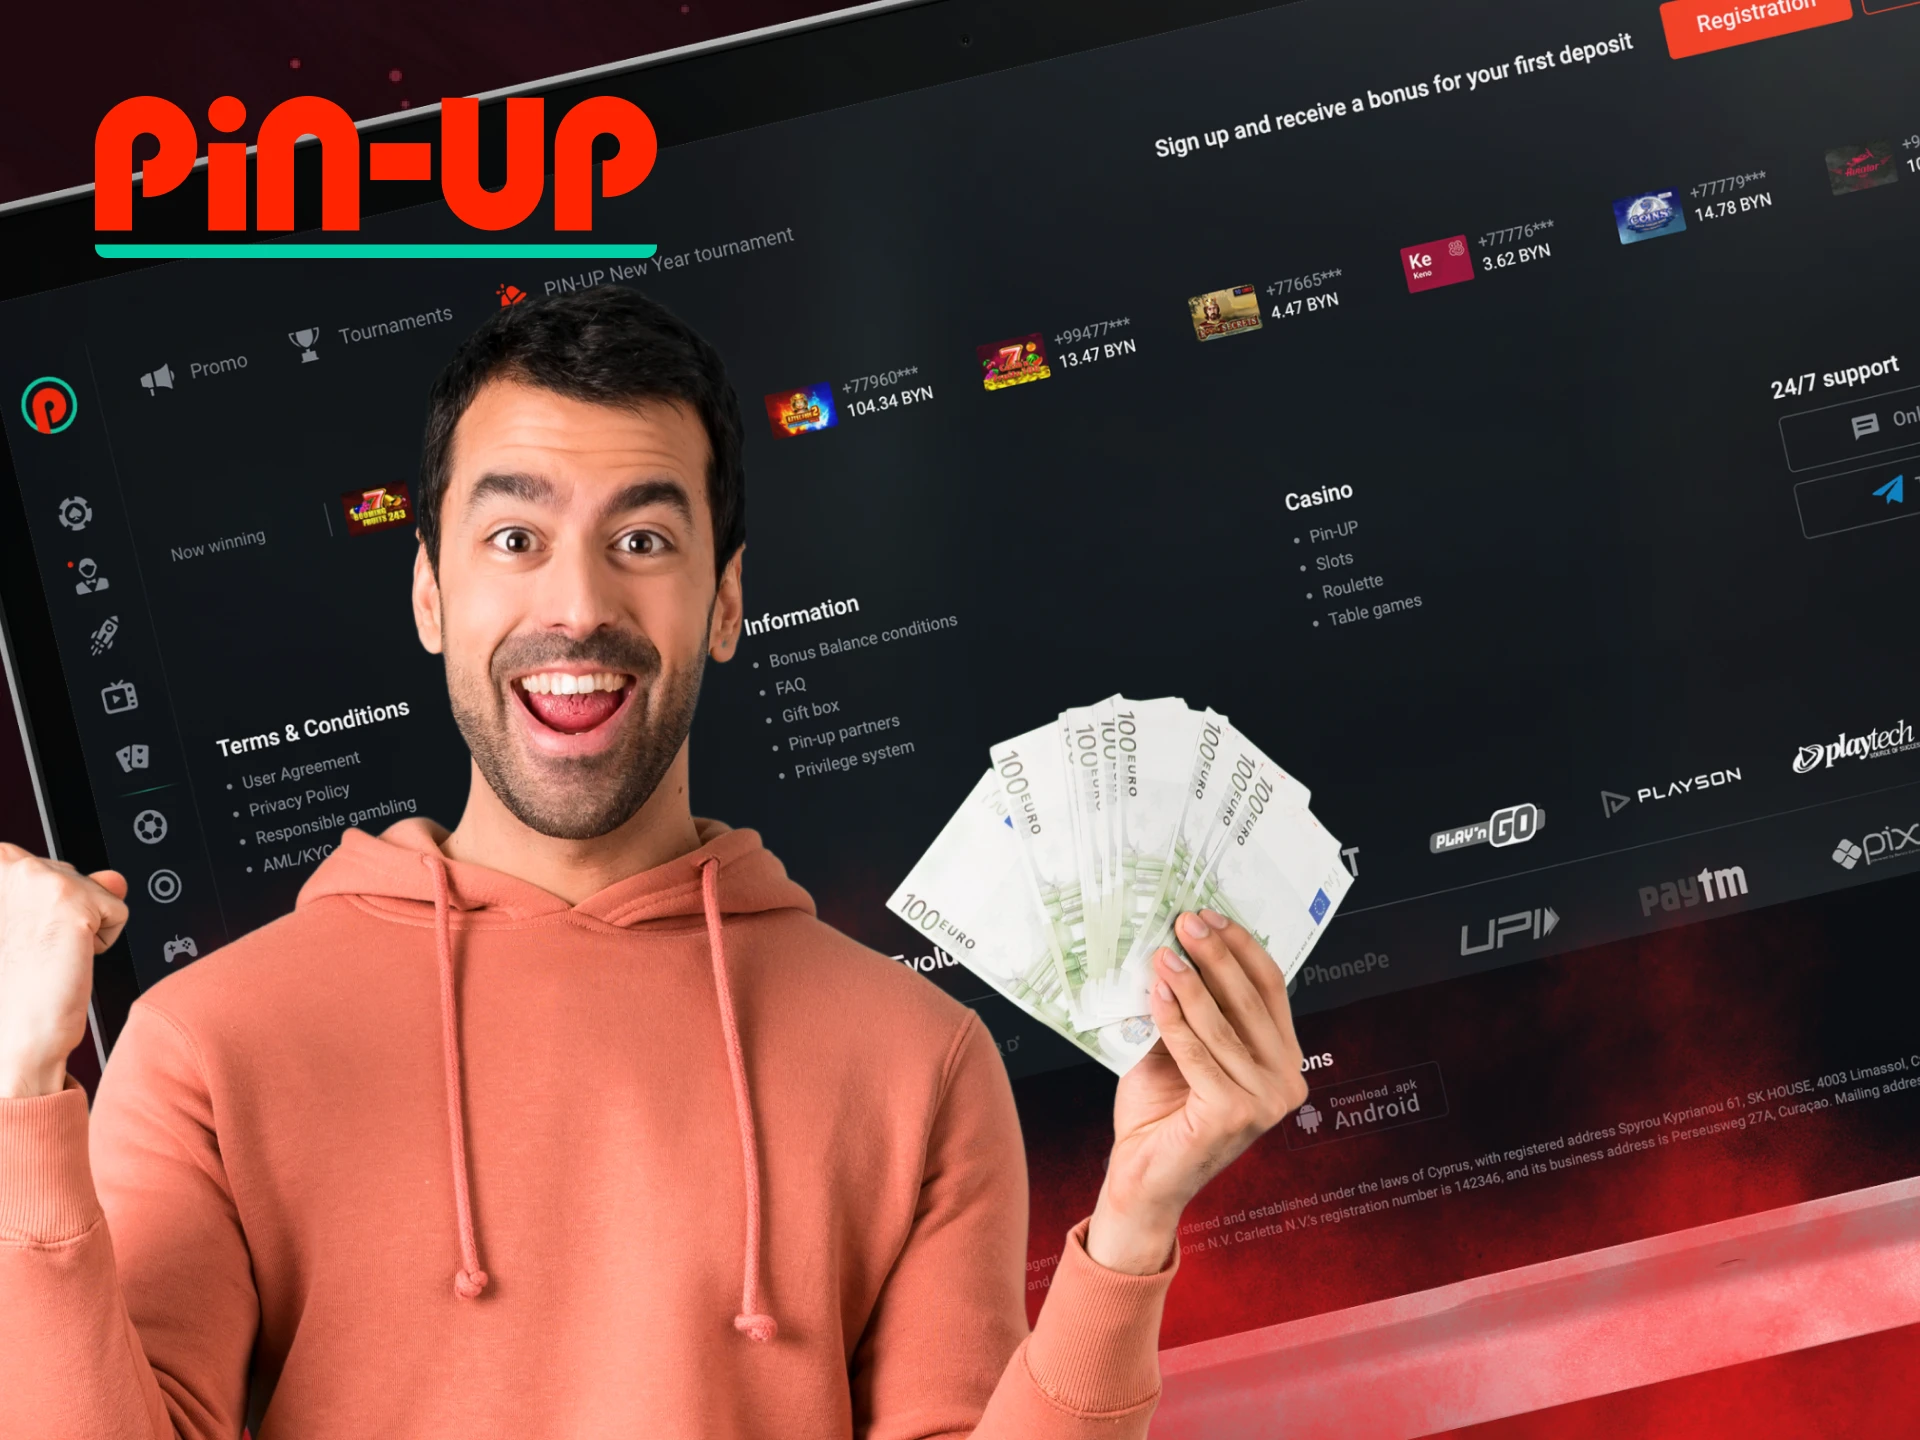 What are the methods for depositing and withdrawing funds on the Pin Up casino website.